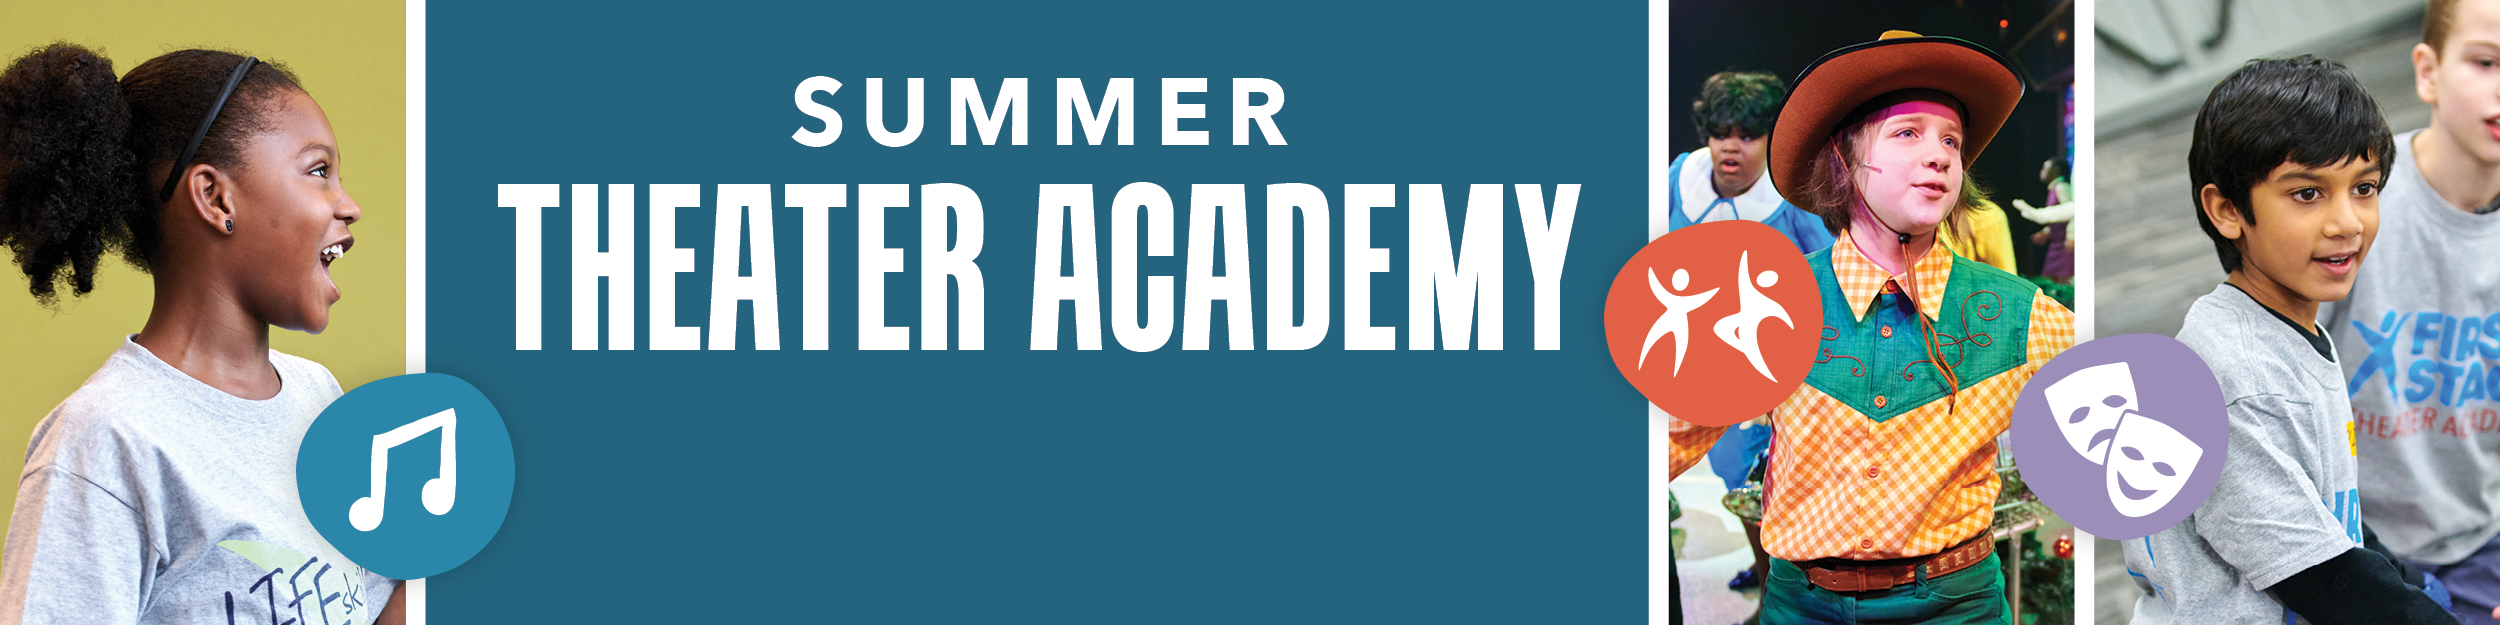 First Stage Summer Theater Academy